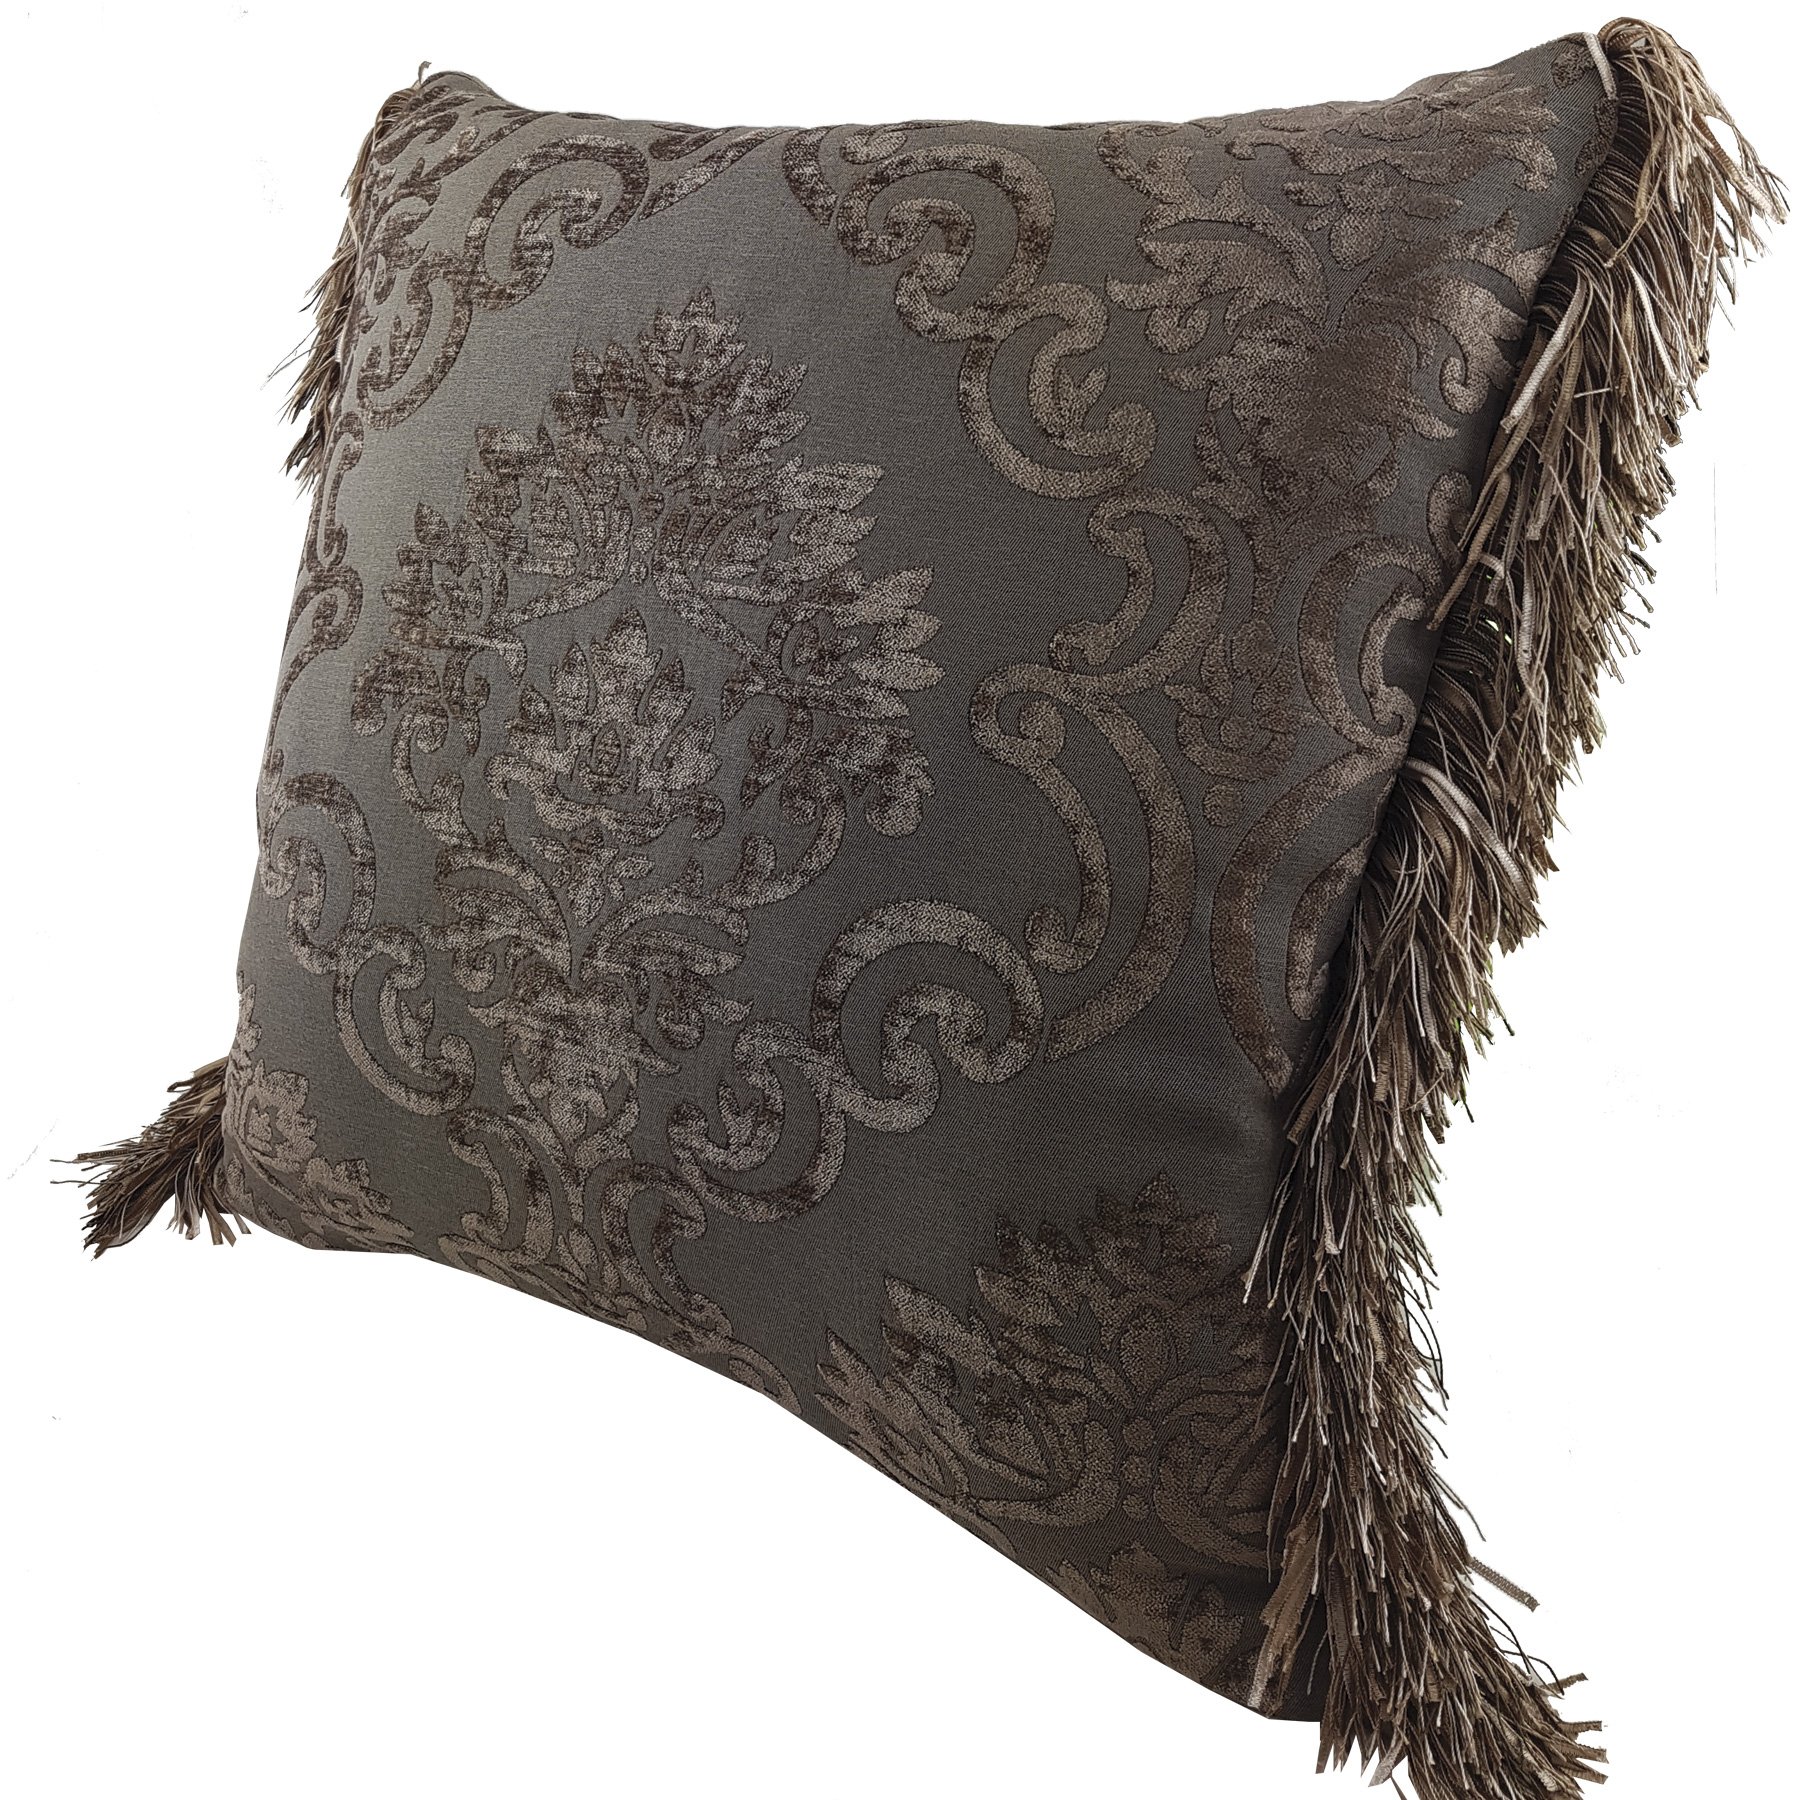 Pair of Chenille cushion covers 45cm x 45cm - French Chocolate / Brown colour trimmed with matching ruche